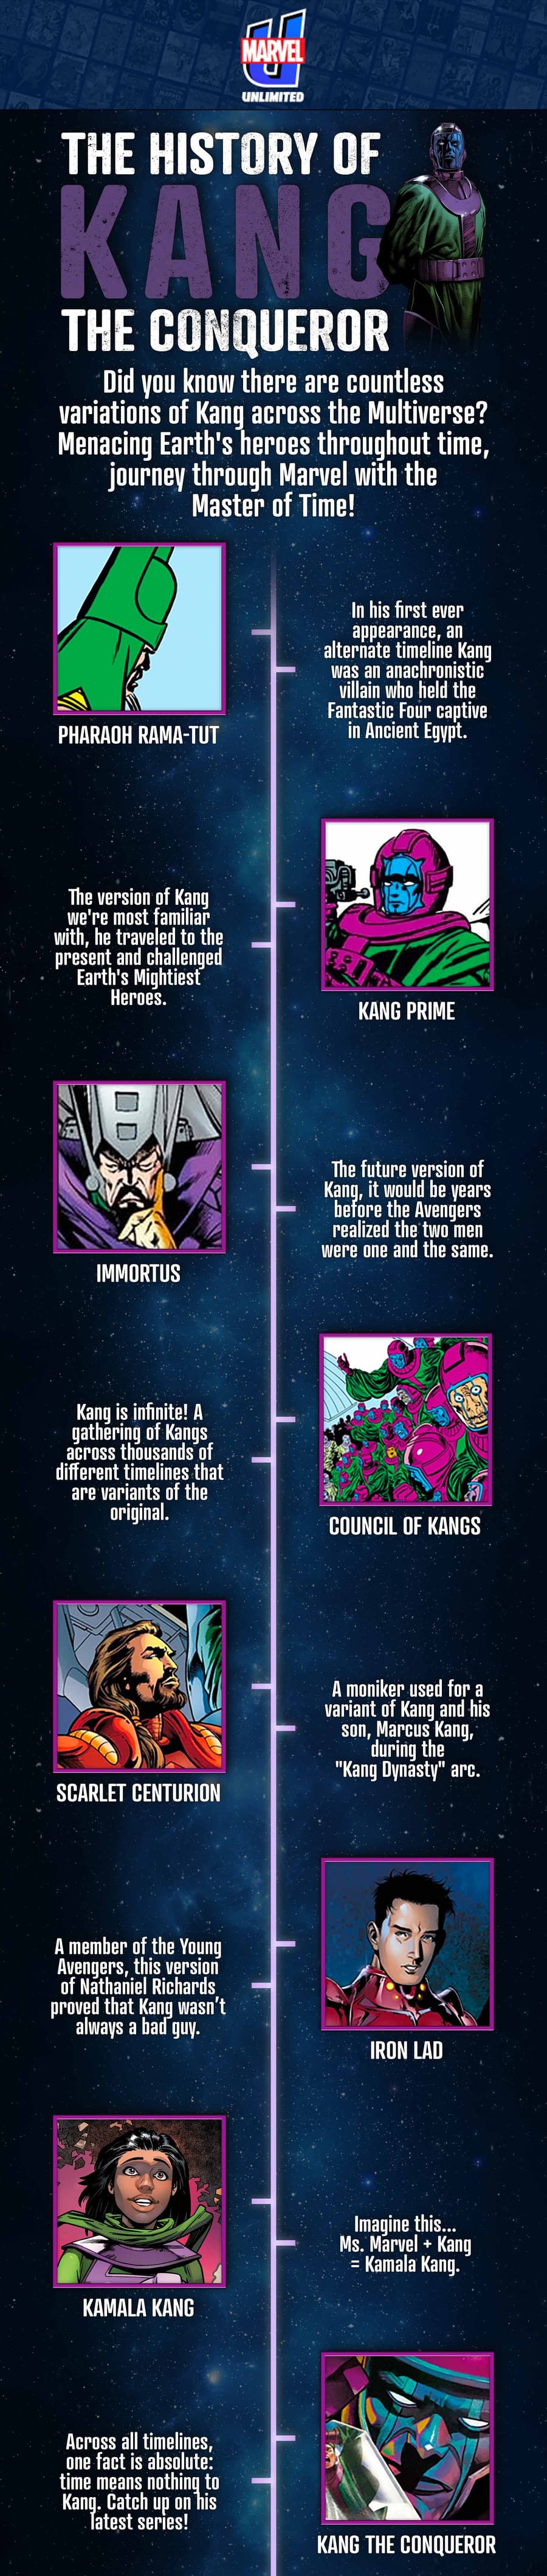 Timeline of Kang in the comics